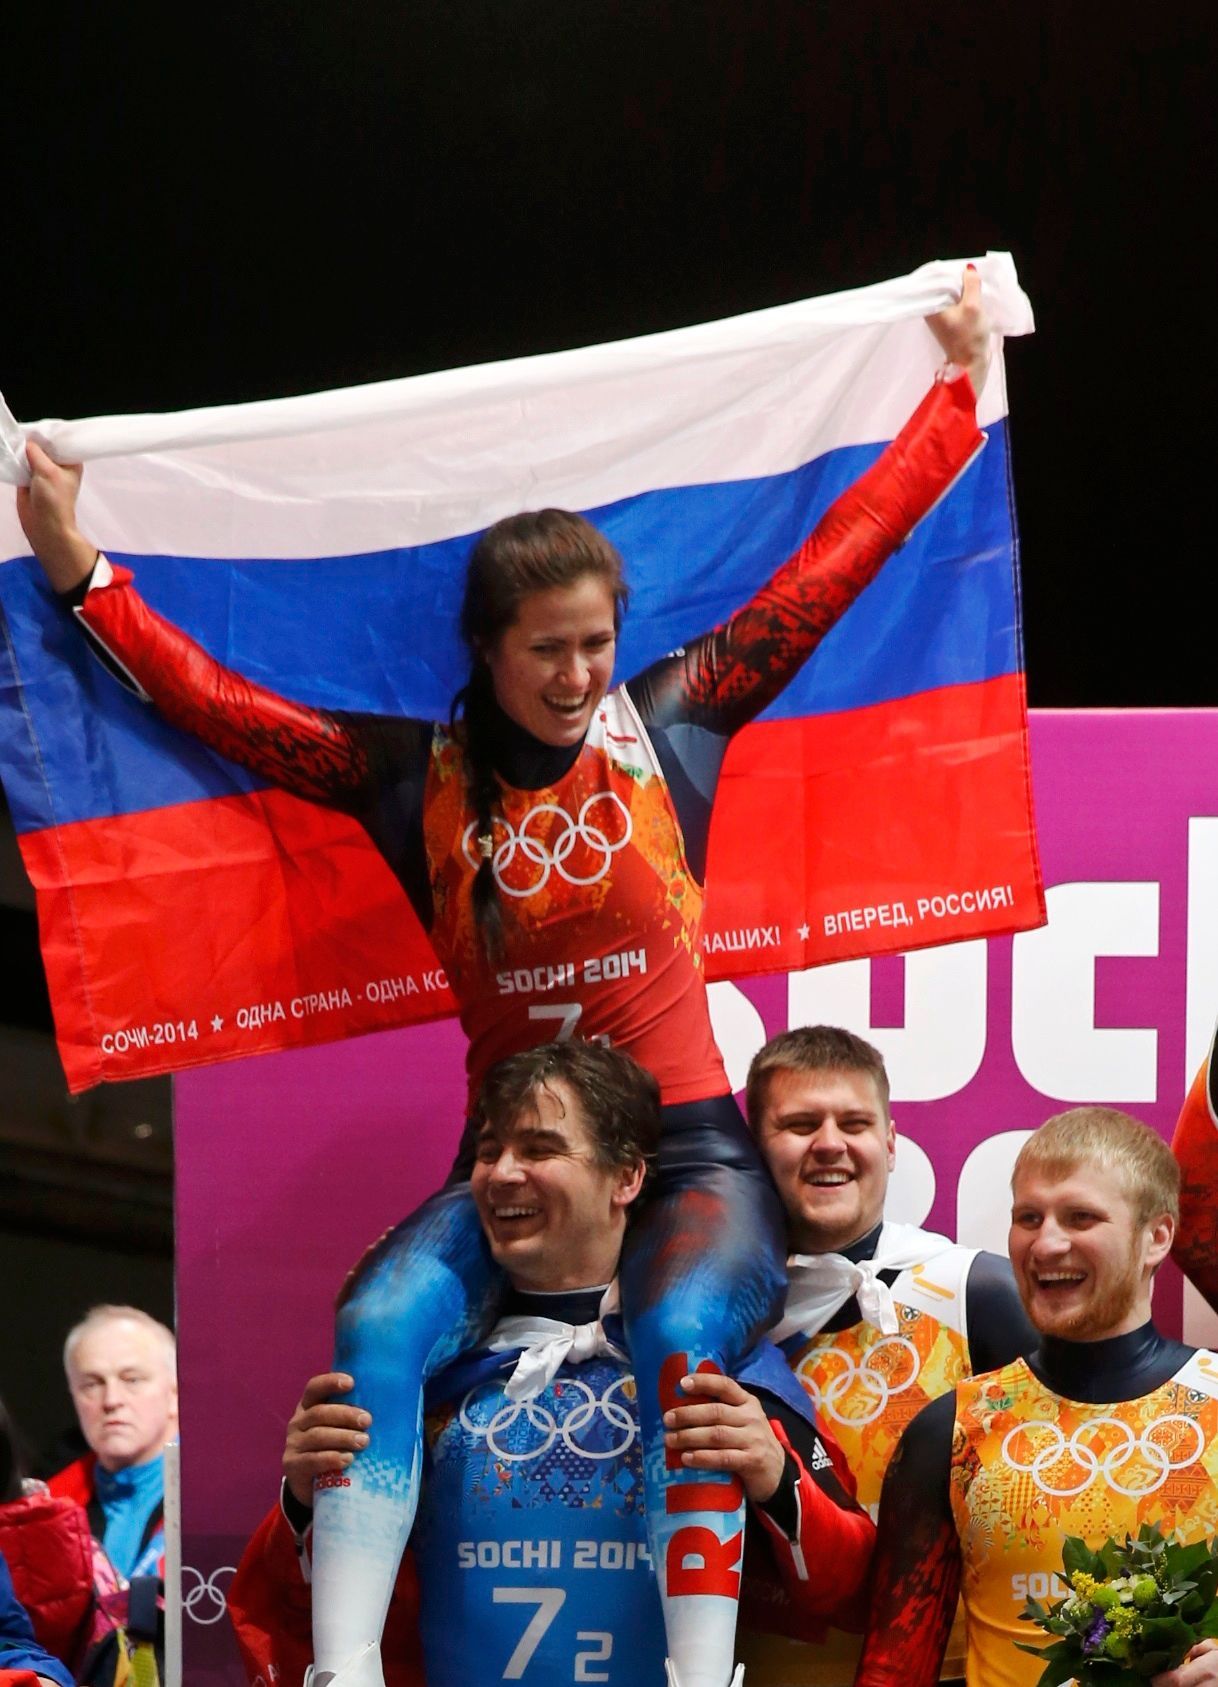 Russia's Demchenko, Ivanova, Antonov and Denisyev celebrate their second place in the luge team relay competition at the 2014 Sochi Winter Olympics